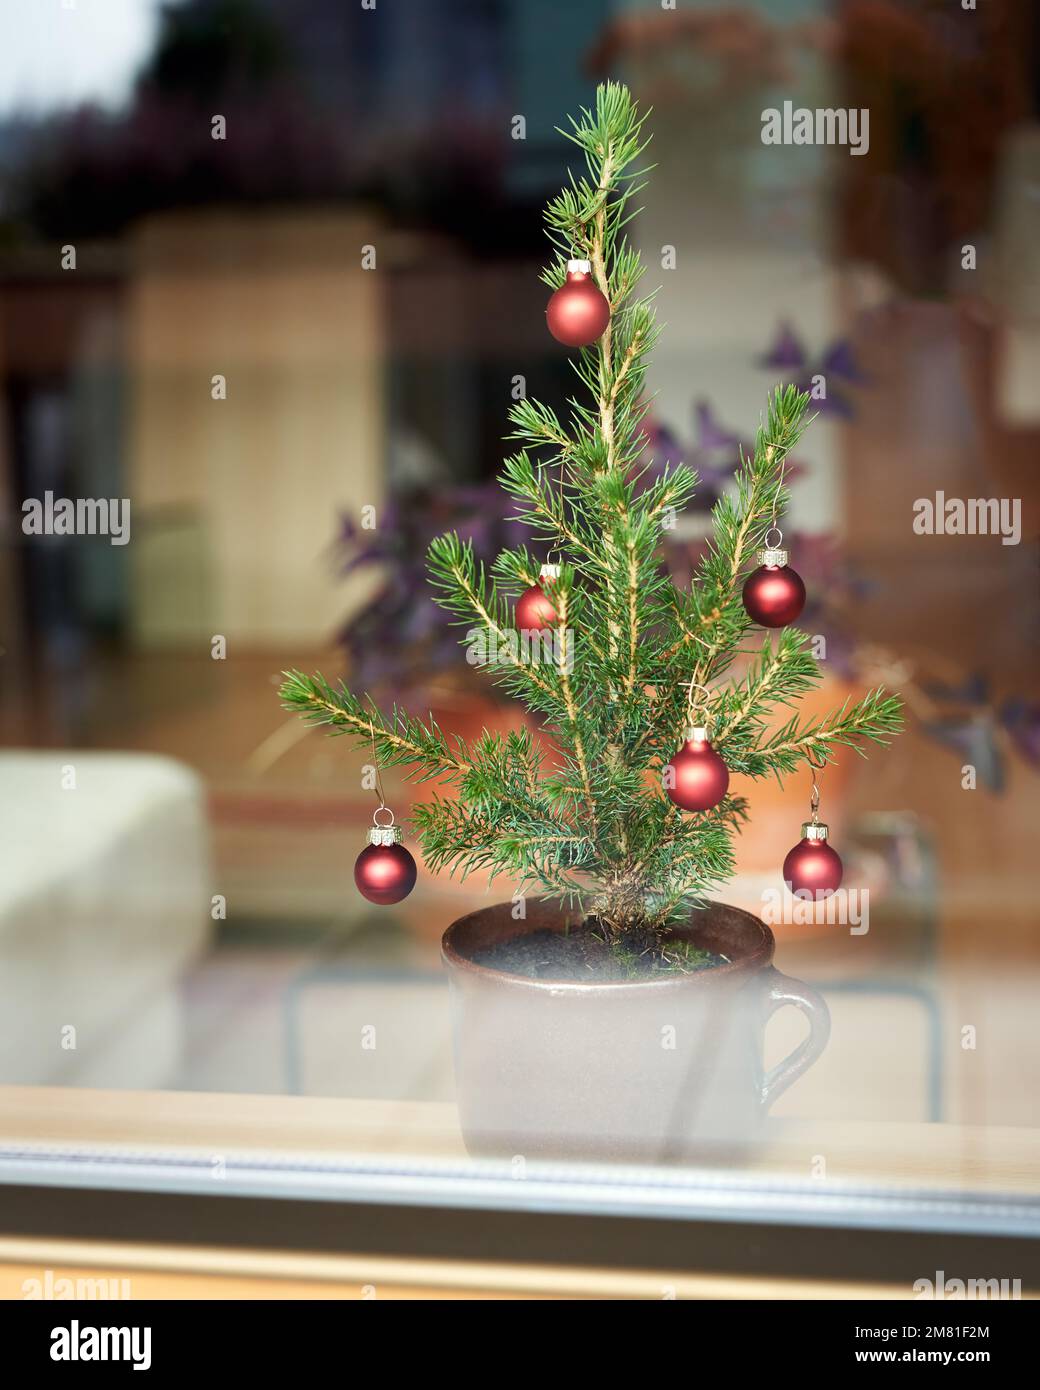 Small decorated Christmas tree in a pot on a windowsill viewed from outside through window glass Stock Photo